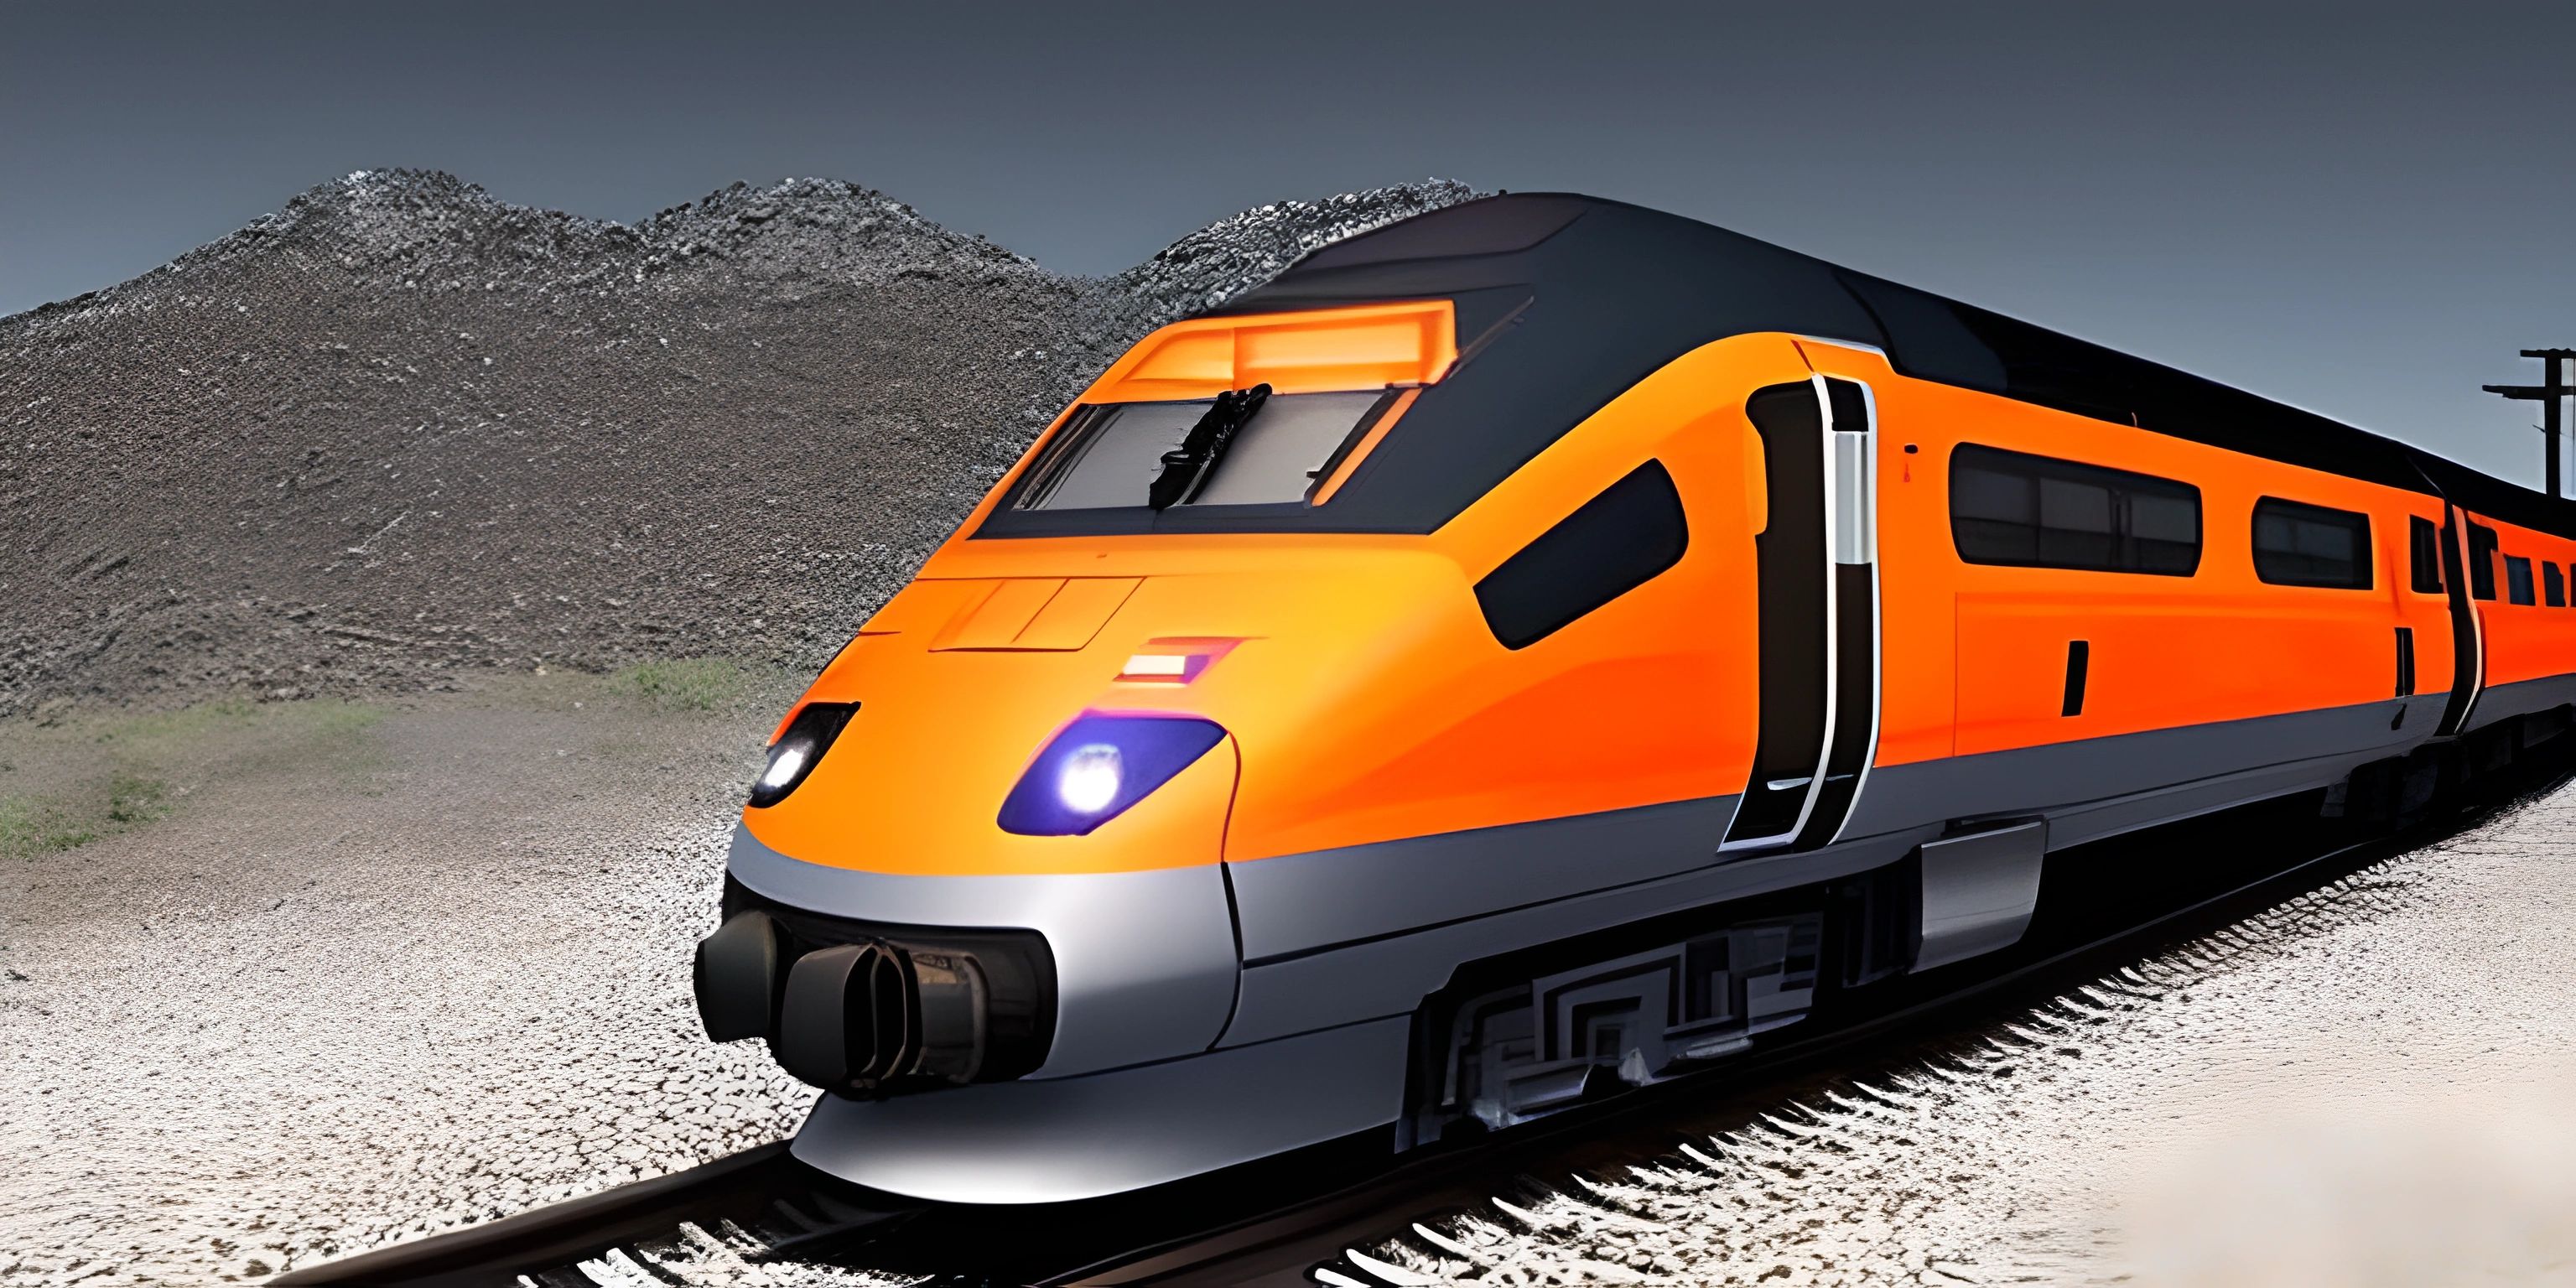 the modern electric train travels on a track through the desert fields of desert terrain and rocks